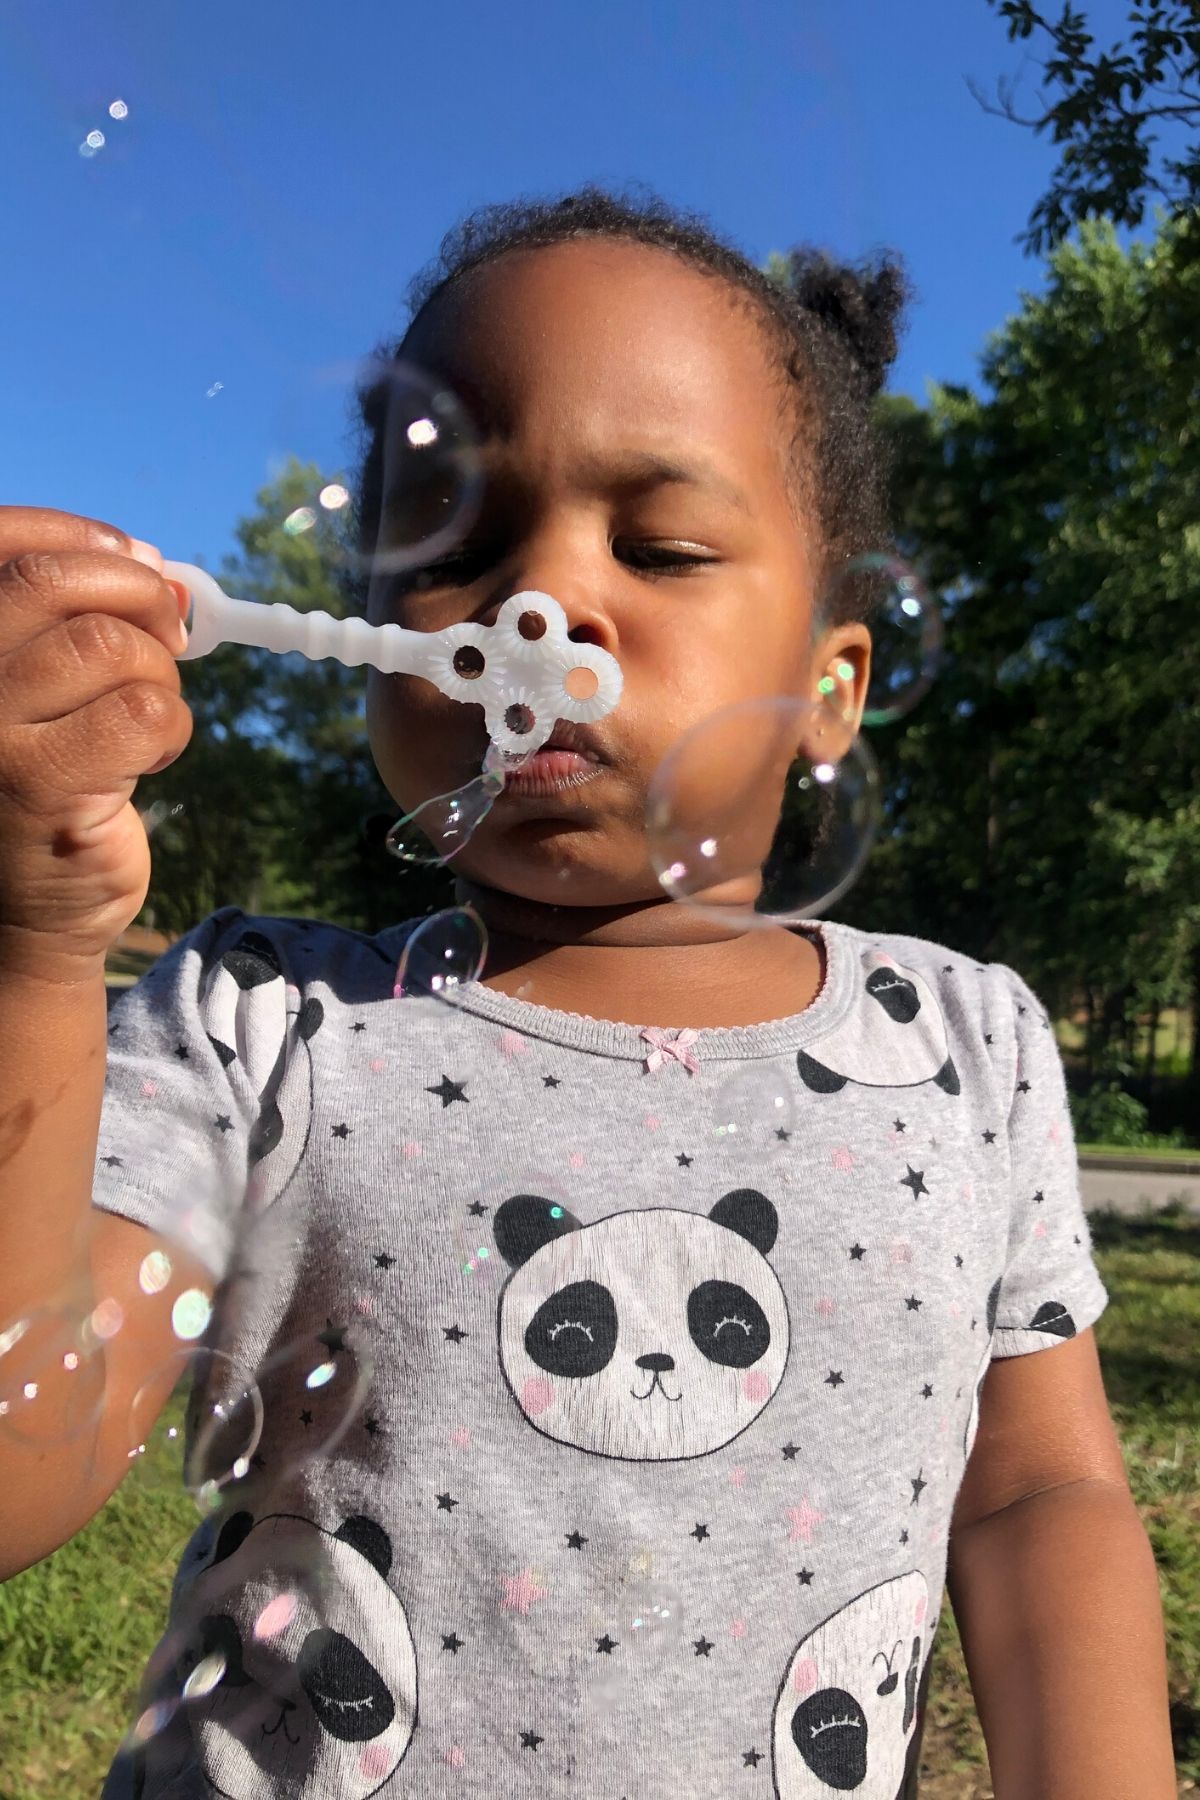 girl blowing bubbles having some outdoor fun